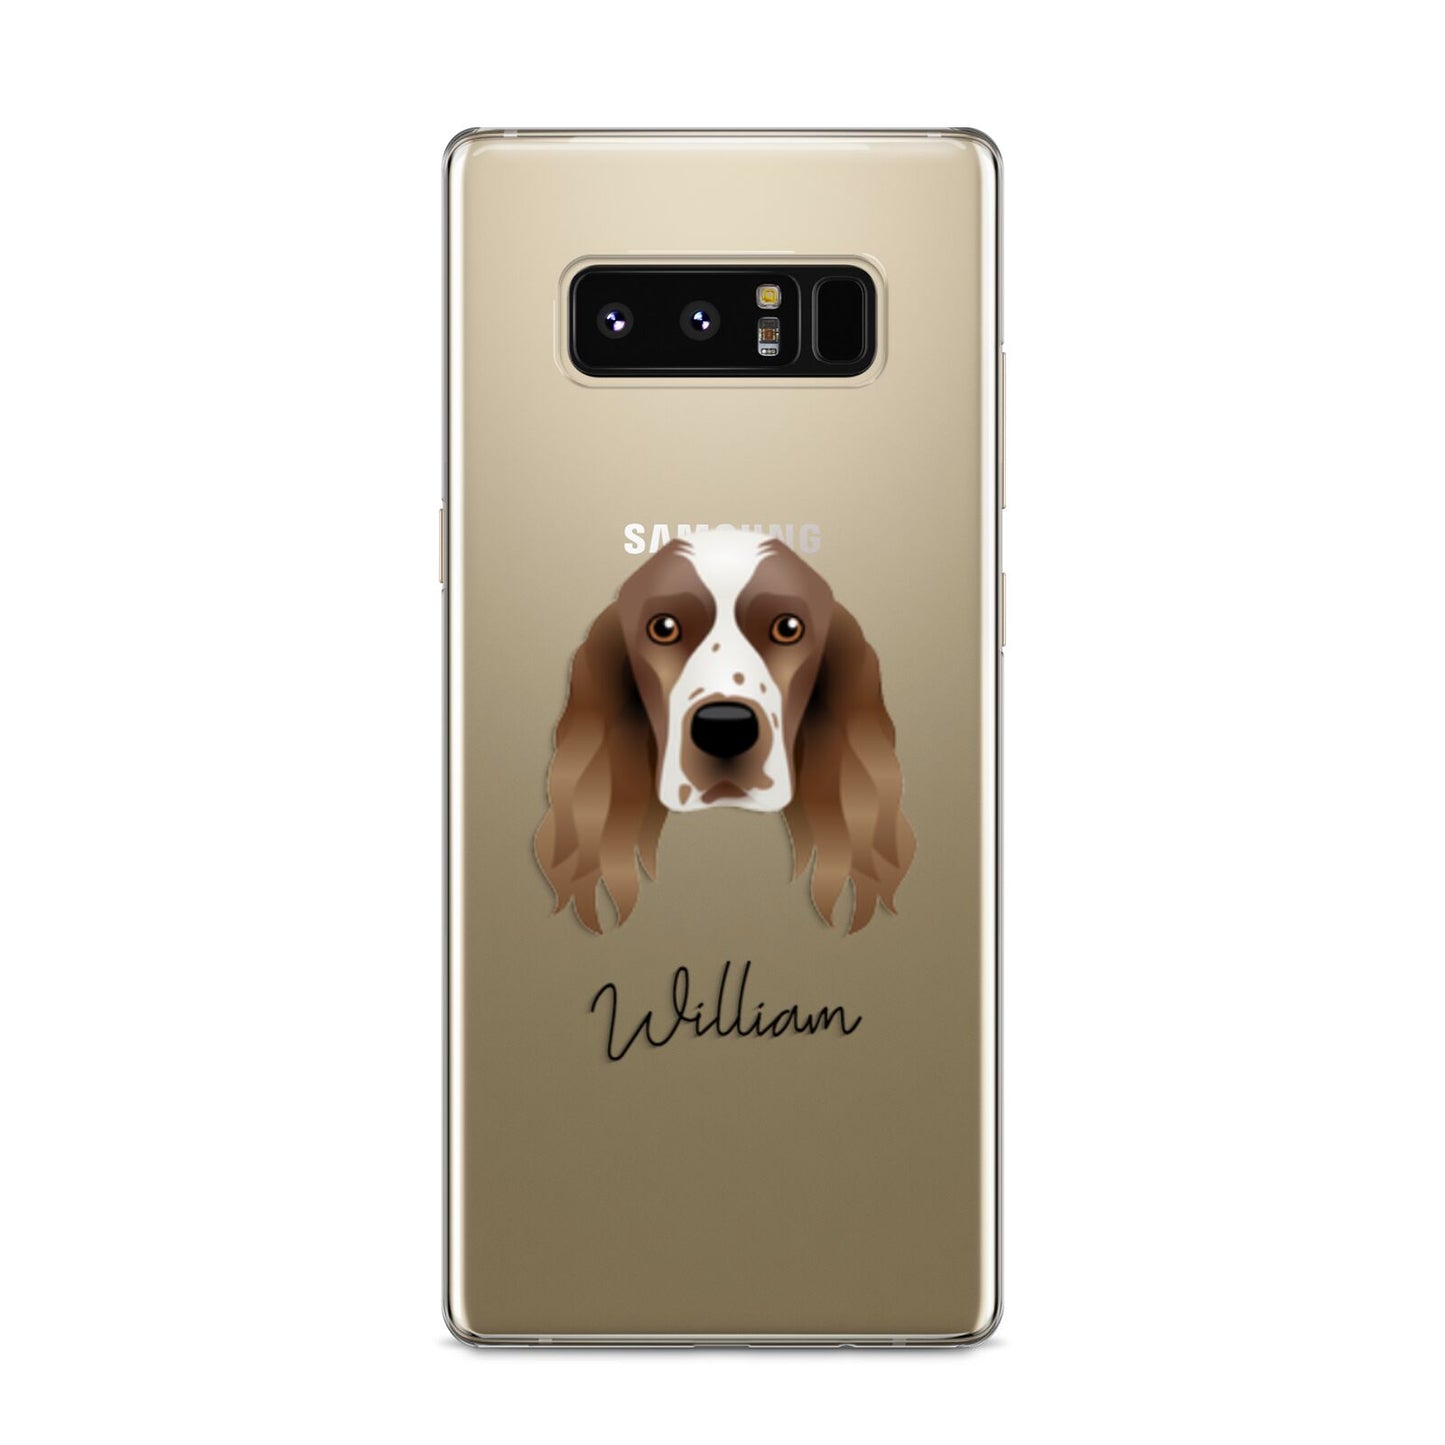 Welsh Springer Spaniel Personalised Samsung Galaxy S8 Case